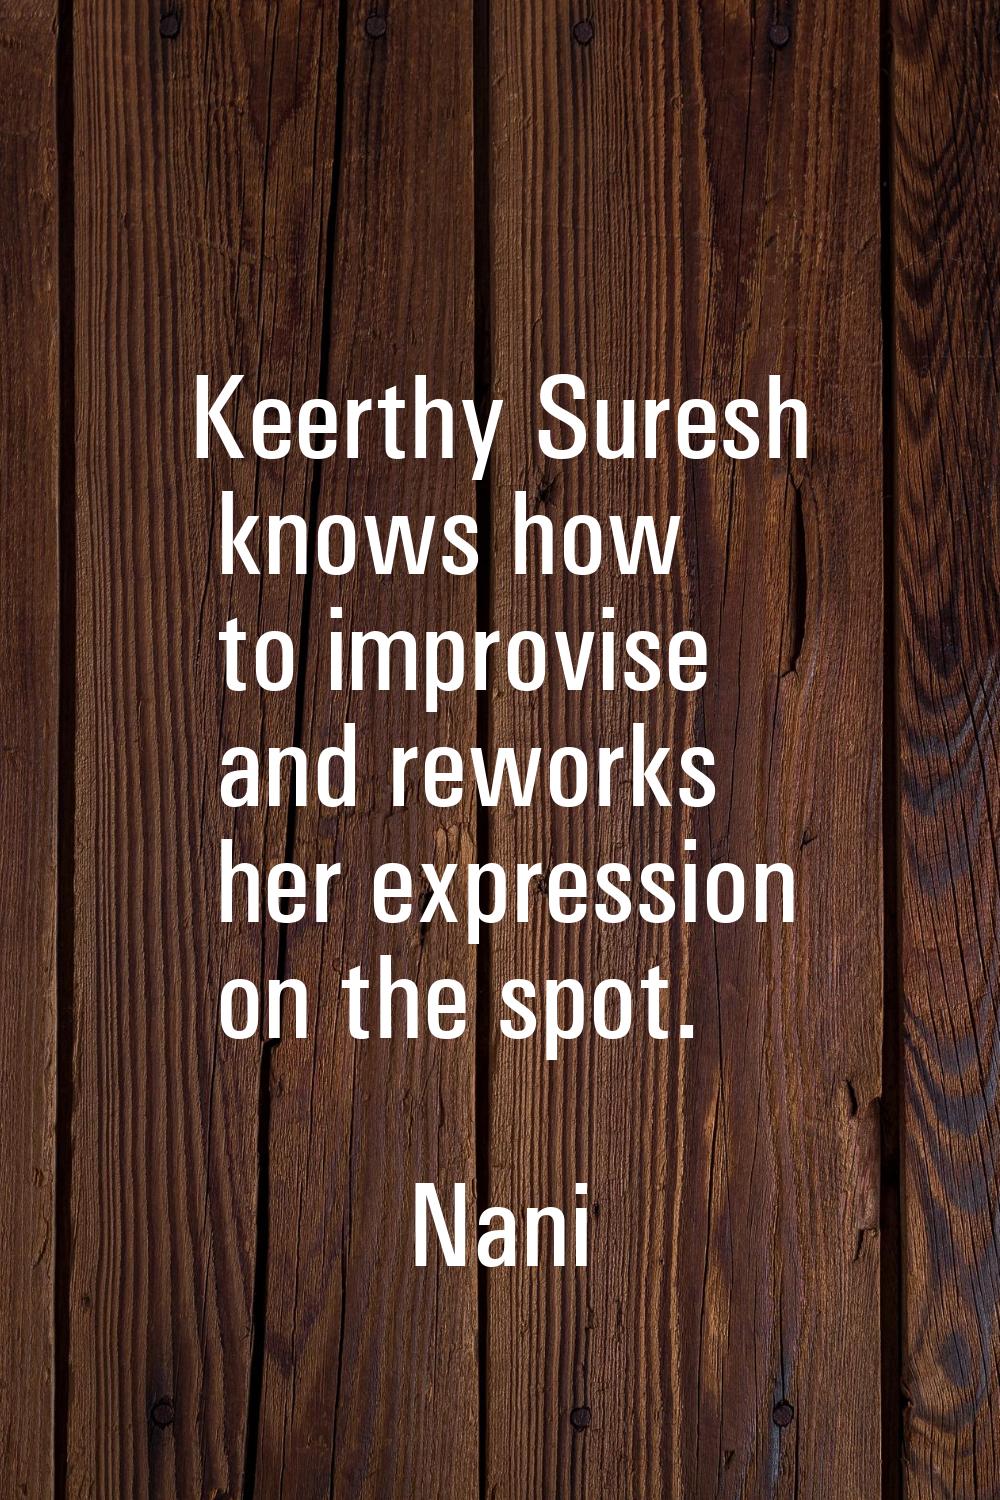 Keerthy Suresh knows how to improvise and reworks her expression on the spot.